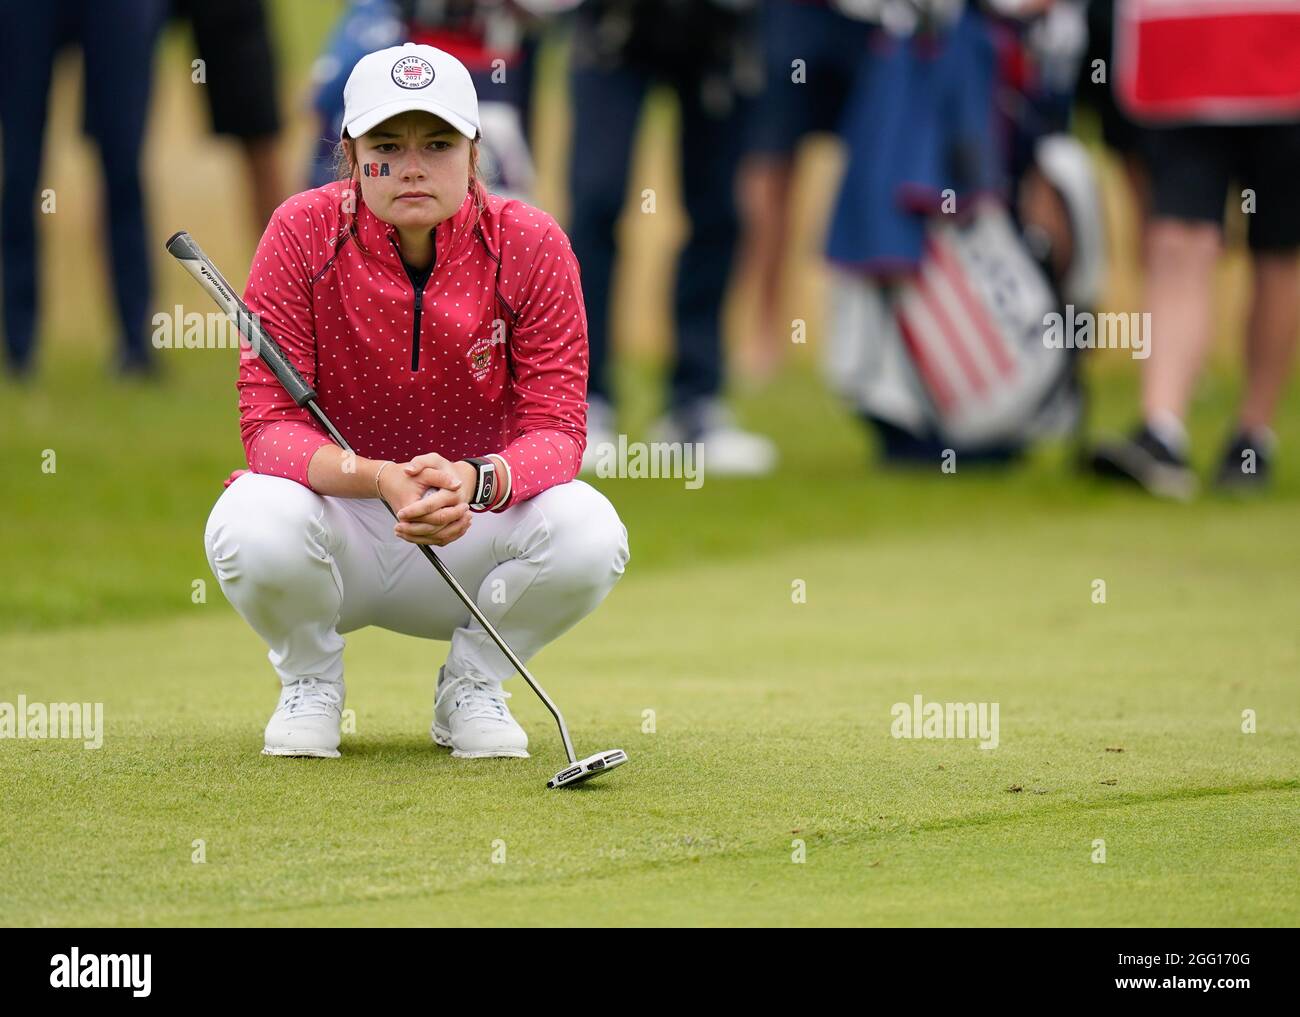 Team USA's Brooke Matthews lines up a putt during the 2021 Curtis Cup Day 1 - Morning Foursomes at Conwy Golf Club, Conwy, Wales on 26/8/21 . (Steve F Stock Photo